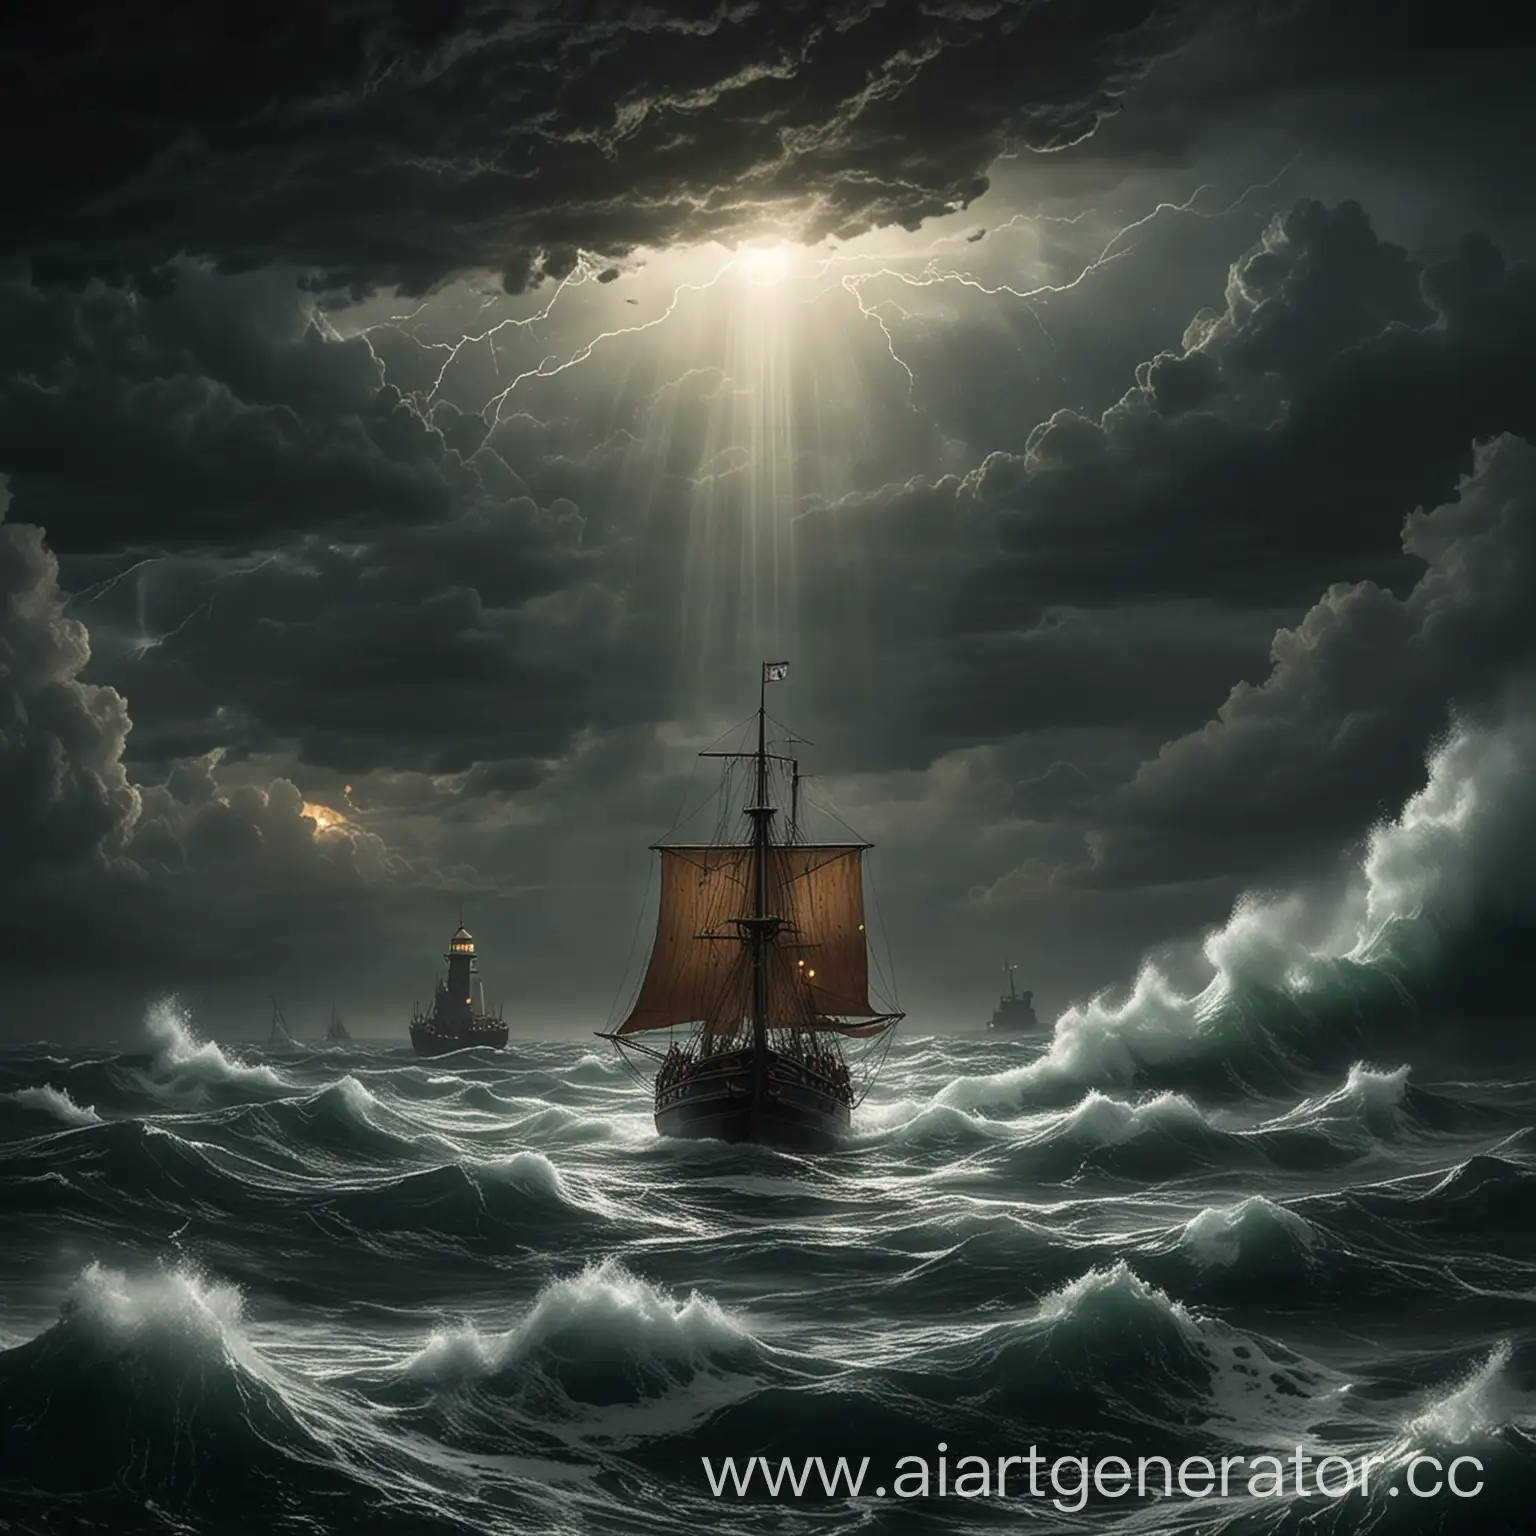 A small boat or ship in the distance, struggling to stay afloat in the stormy seas, with the beacon's light serving as a guiding force to help them reach safety.